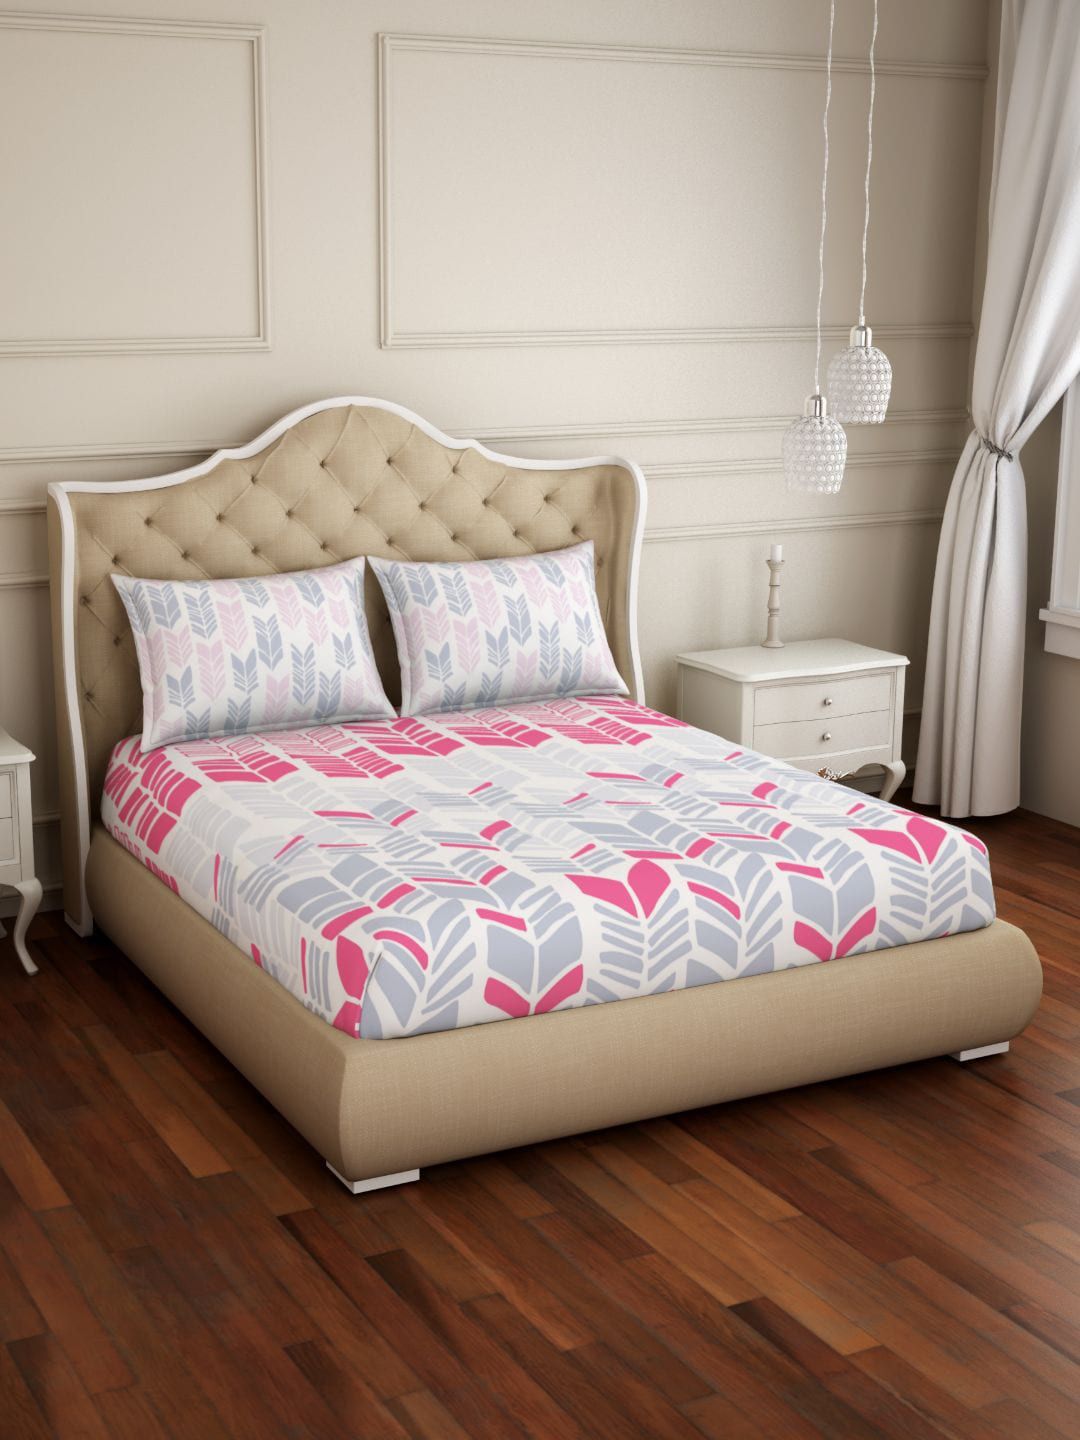 Spaces Atrium Plus Geometric Pink 1 King Size Fitted Sheets With 2 Pillow Cover Price in India